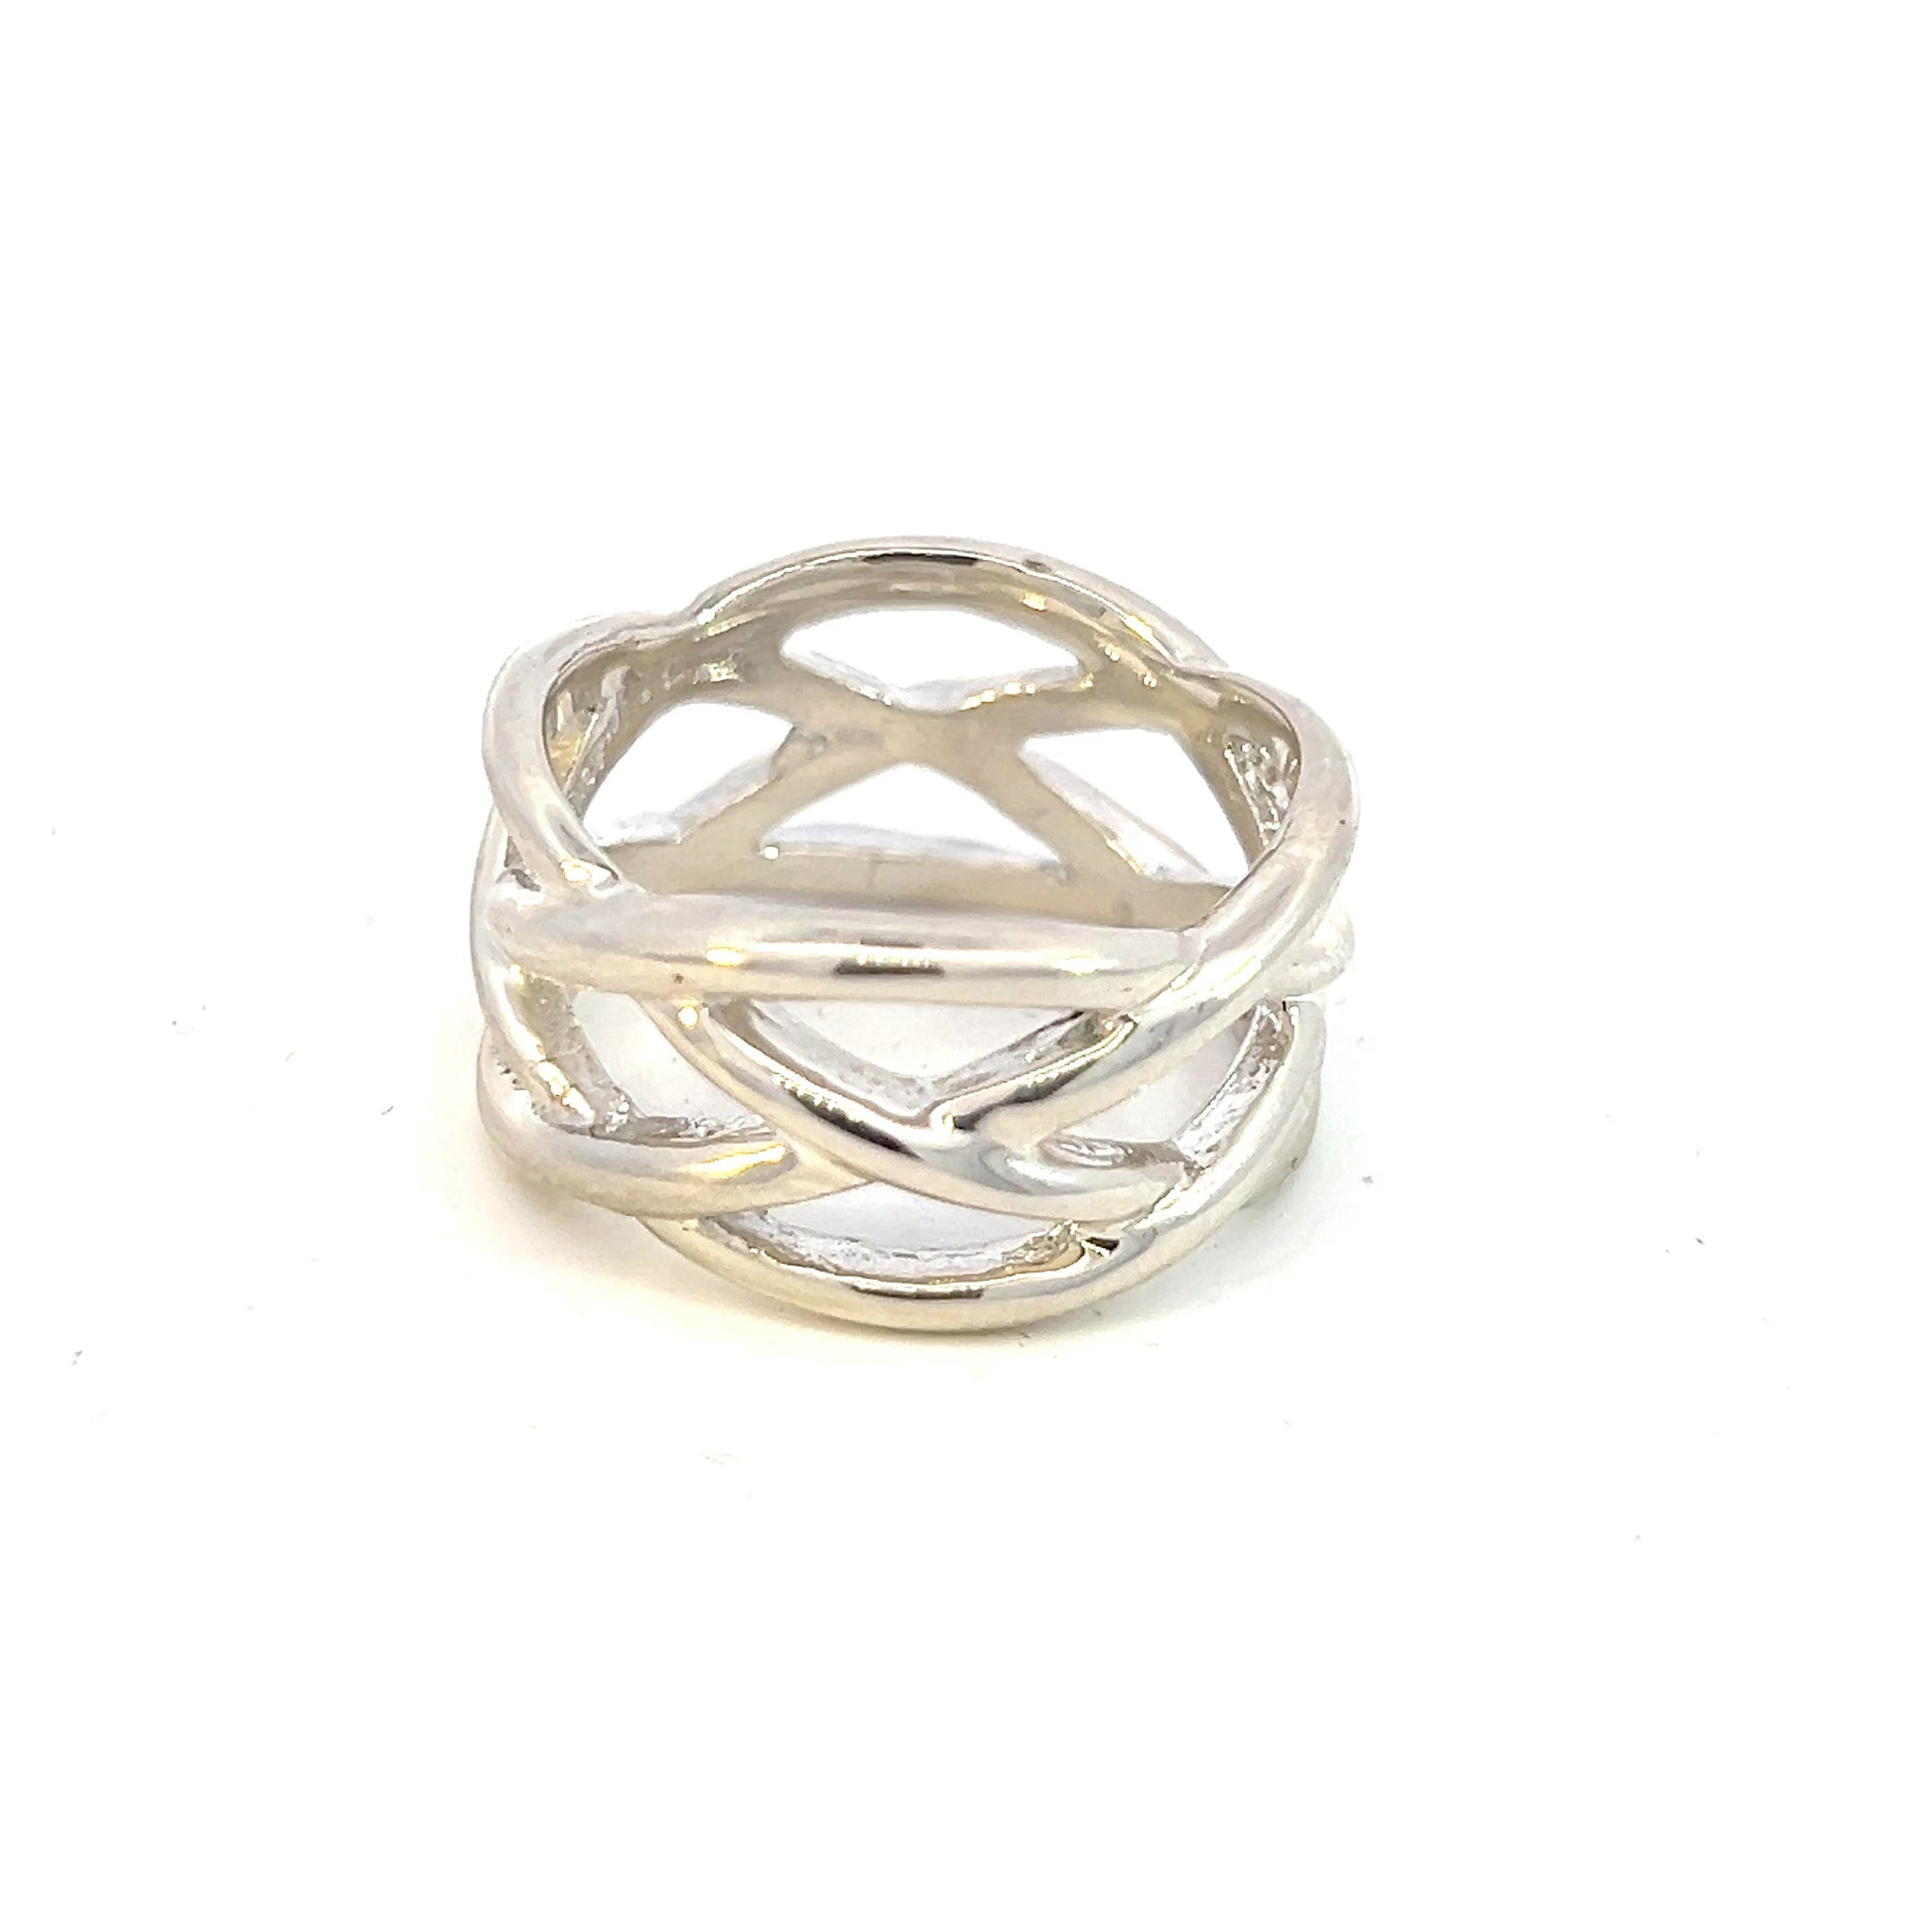 Tiffany & Co Estate Celtic Knot Ring Size 10 Sterling Silver 12 mm TIF565 - Certified Fine Jewelry